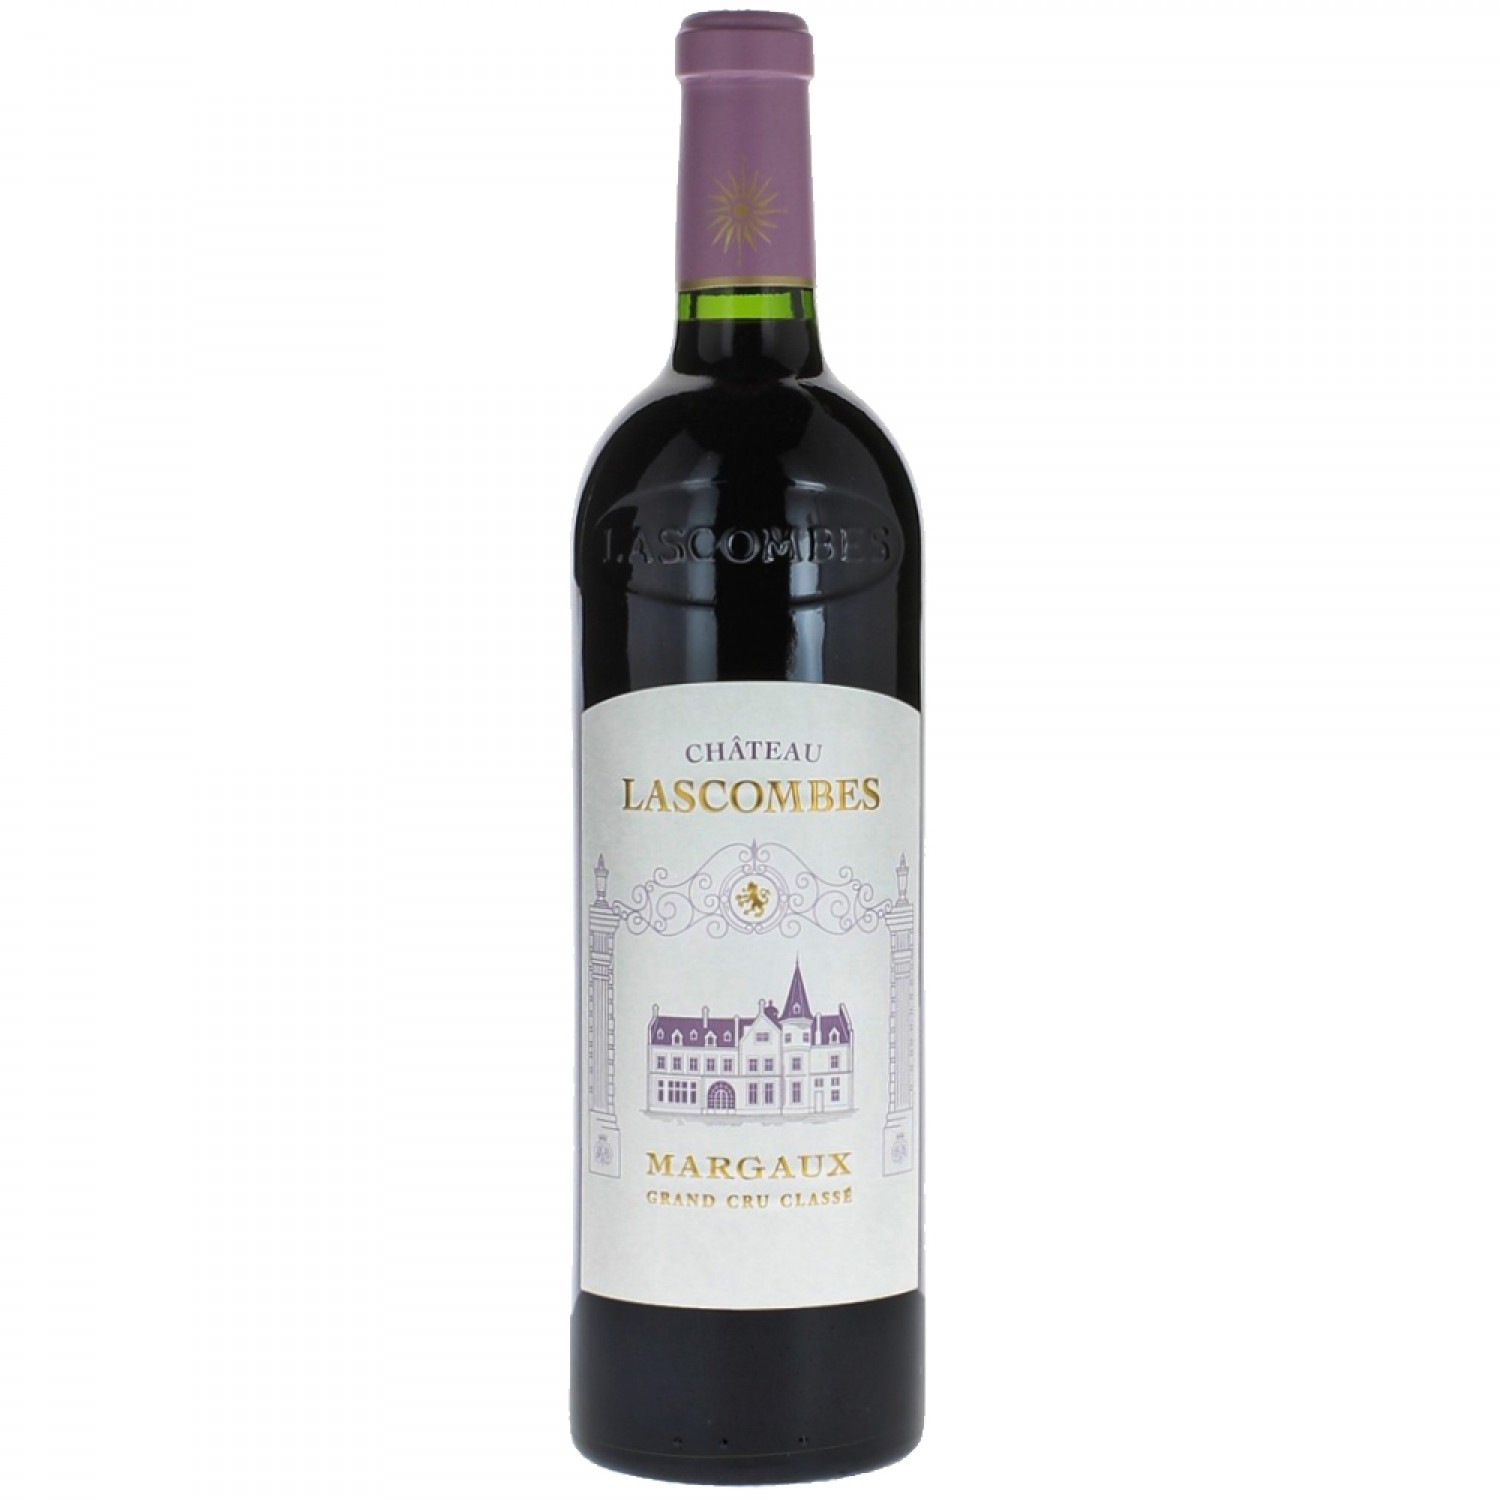 Chateau Lascombes 2015, Margaux 750ml